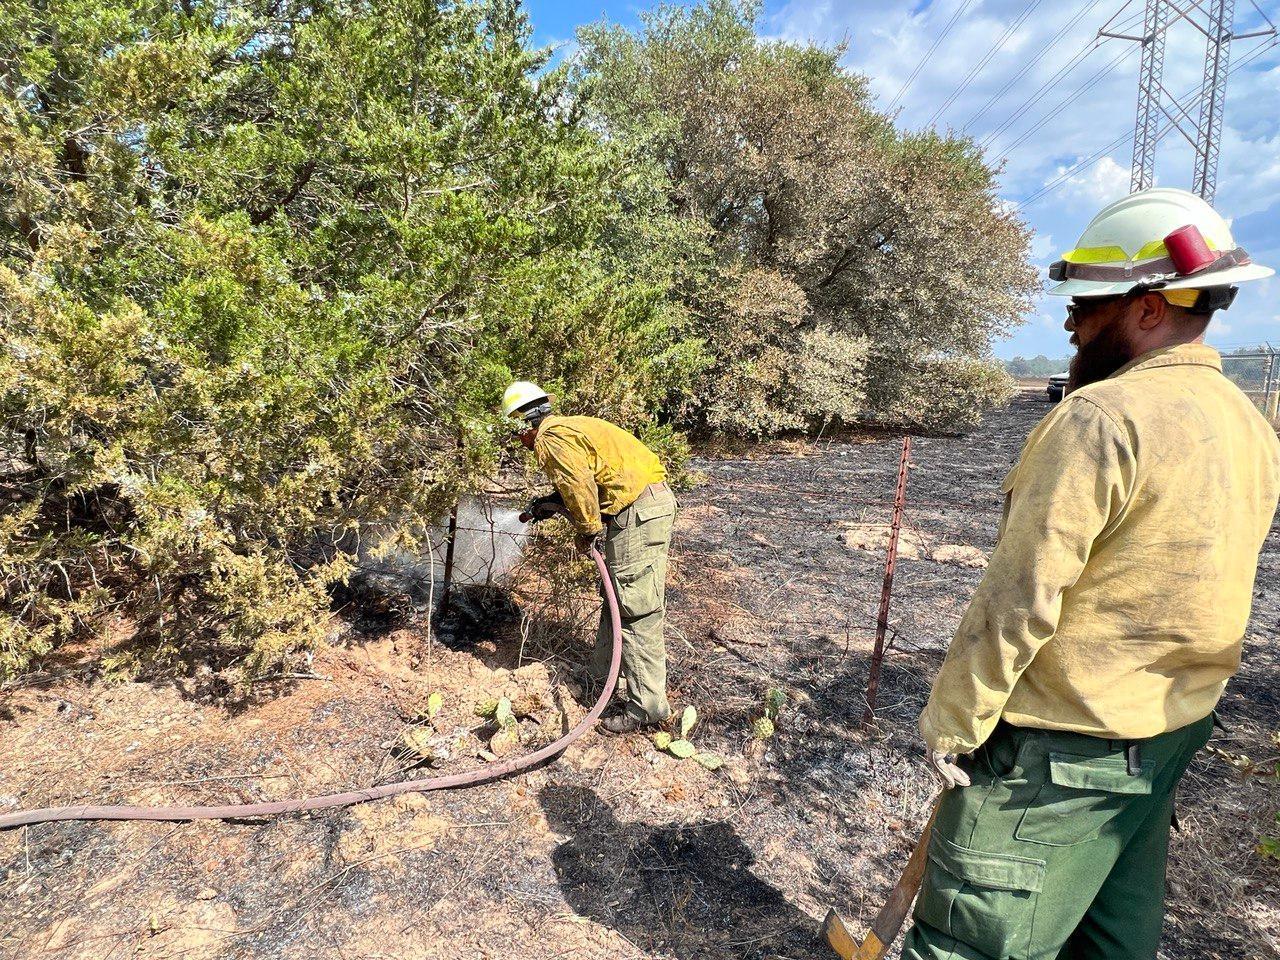 2 male firefighters in yellow shirts and green pants work to extinguish heat under a tree. One firefighter uses a hose to spray water while another stands nearby with a tool, ready to dig and stir dirt to get the water mixed in.